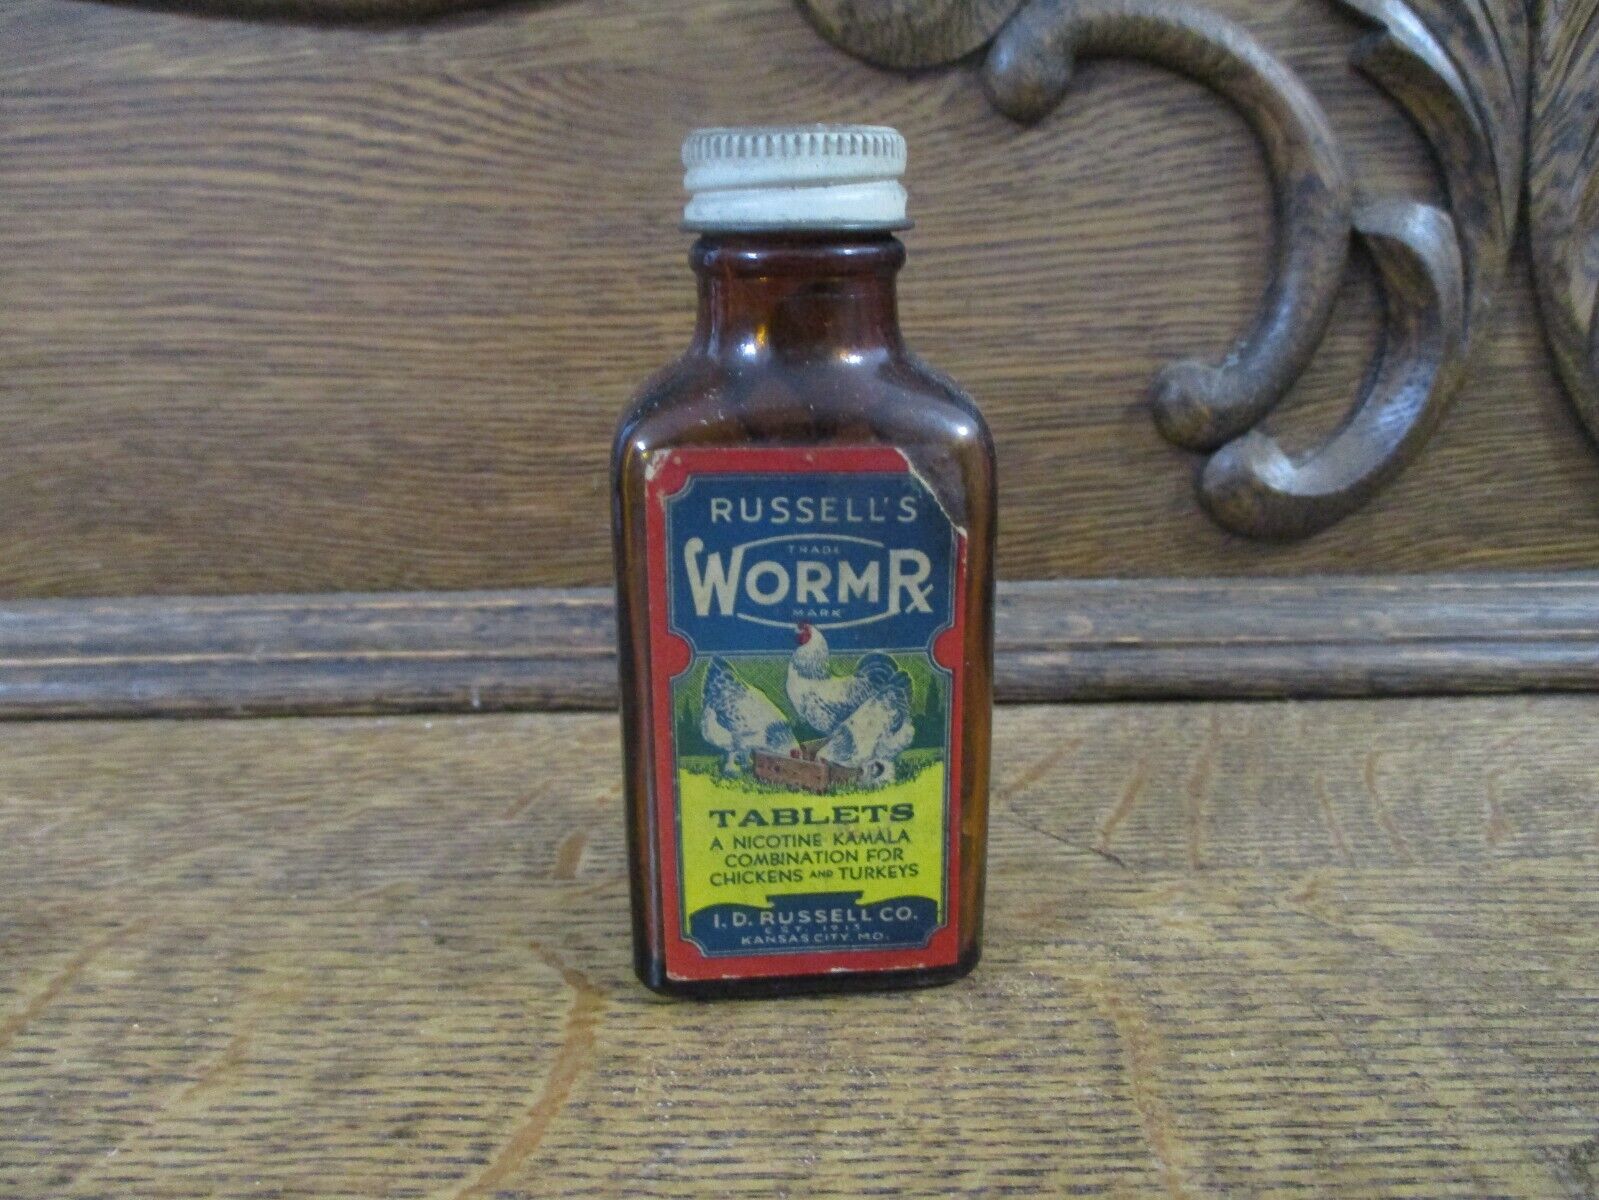 Vintage Russell's WormR Poultry Tablets in Bottle